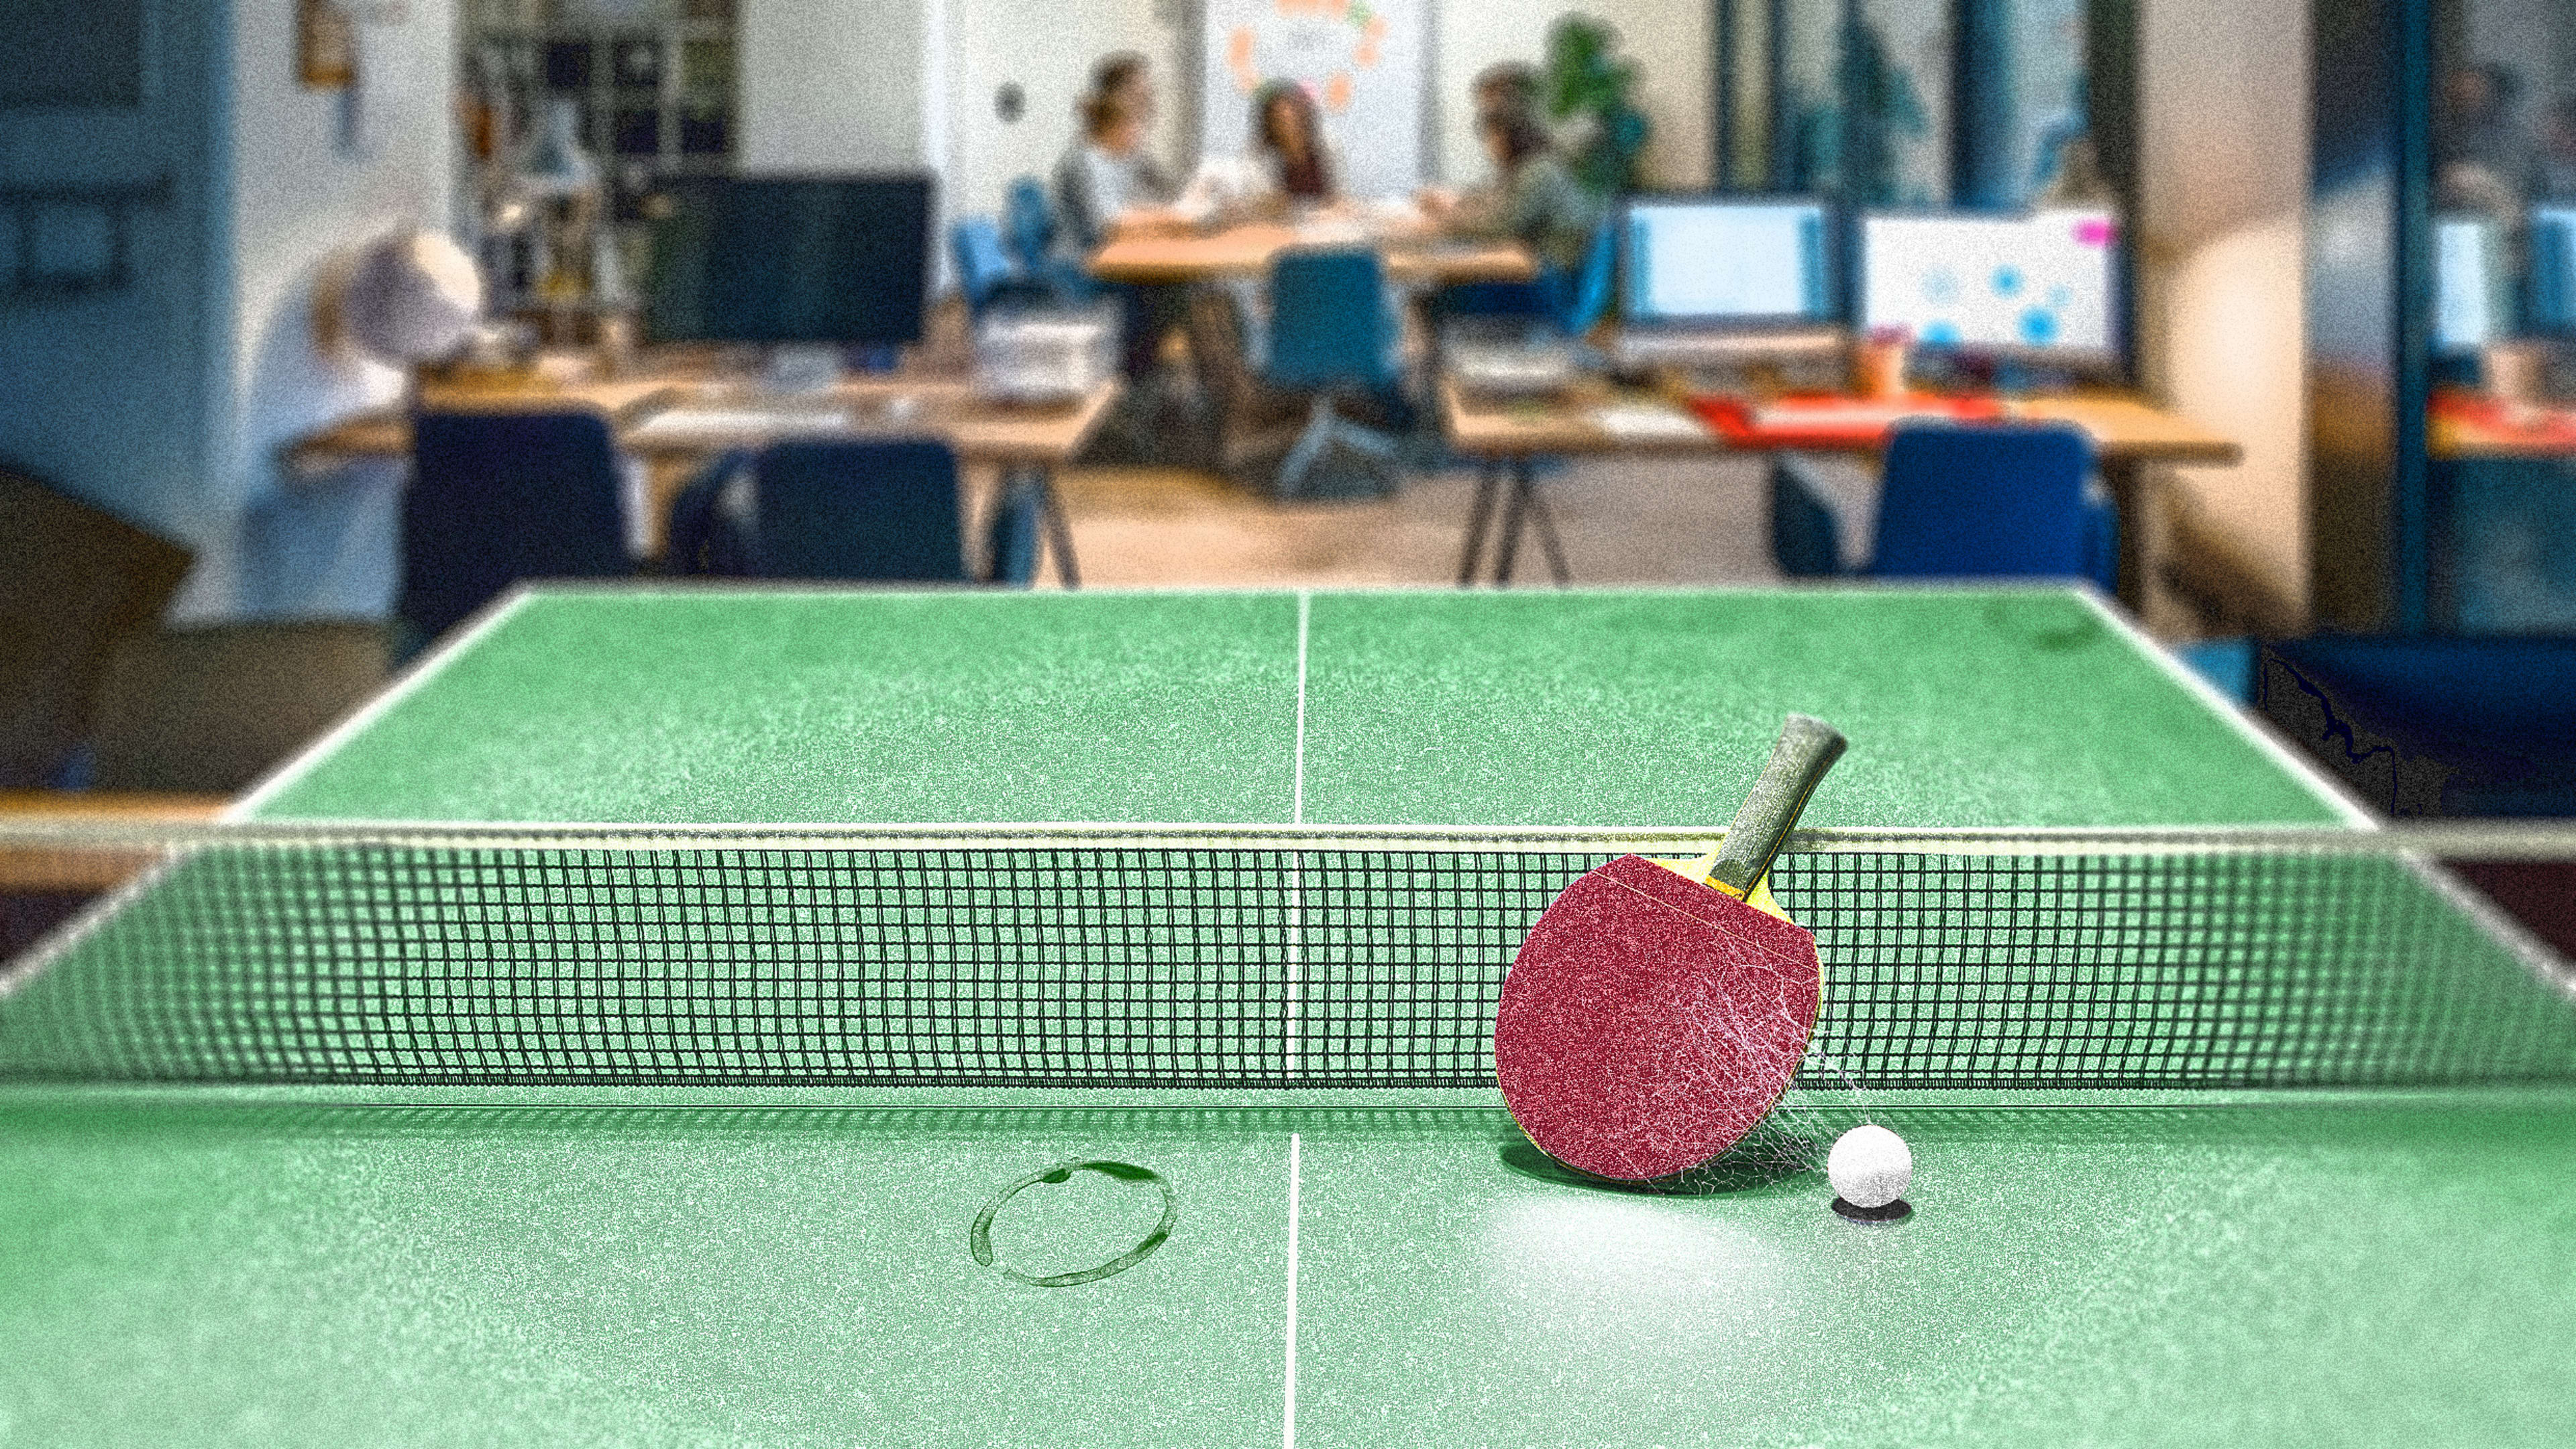 RIP ping-pong. The era of wacky office perks is dead